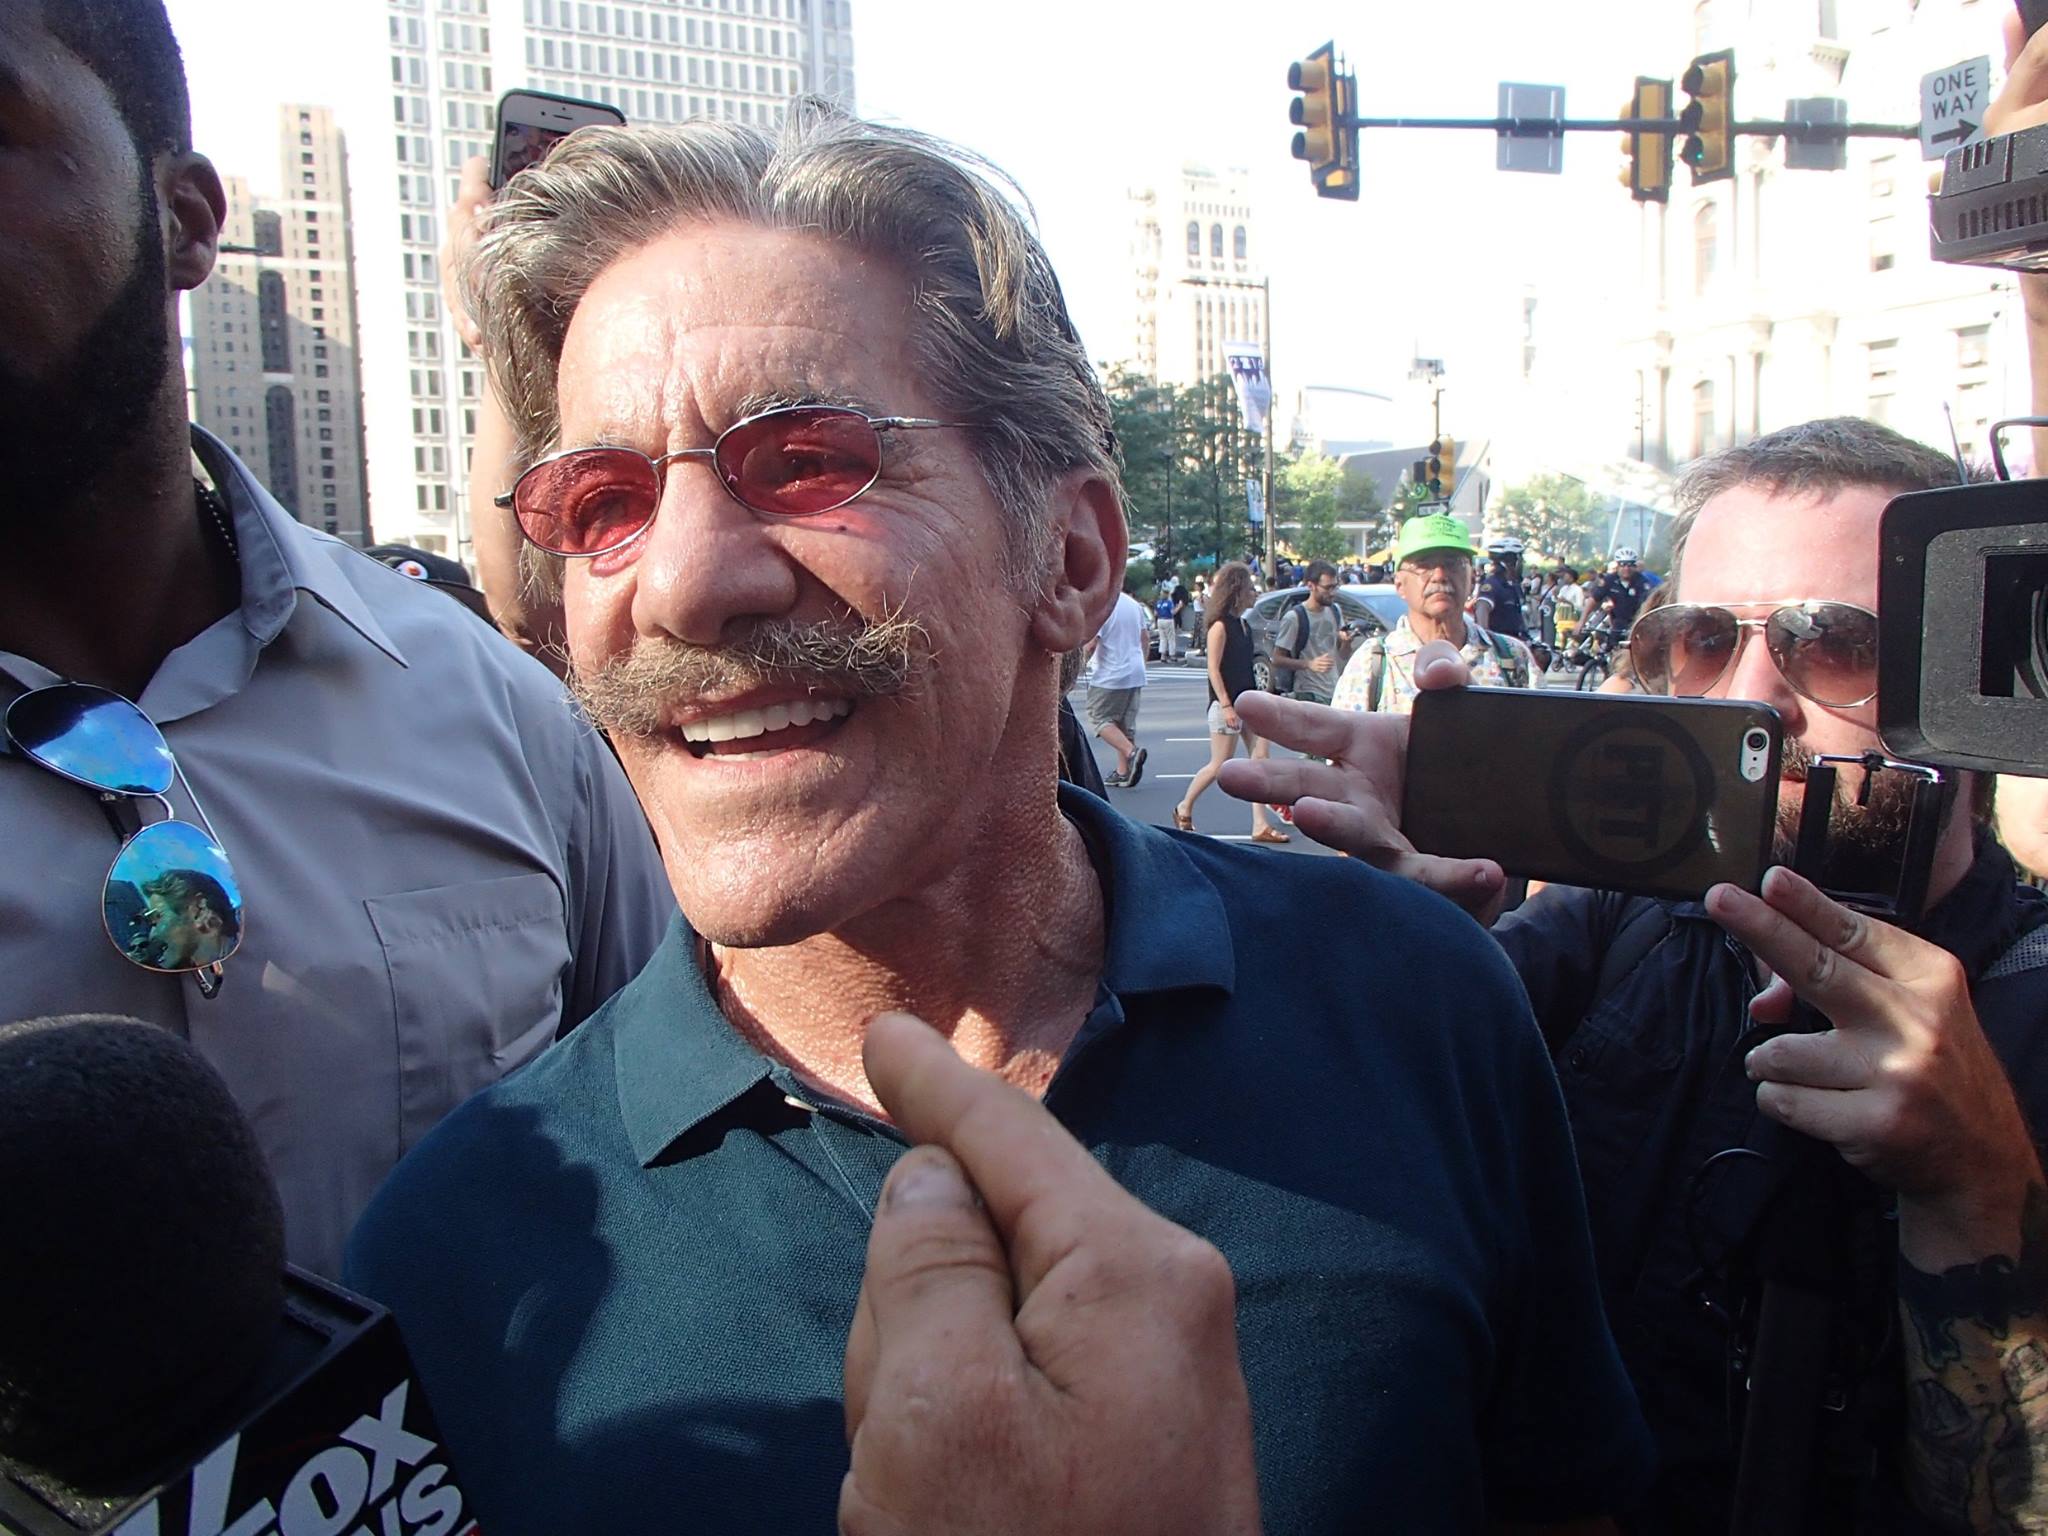 Geraldo Rivera was out reporting on the hot streets amid the protest marchers.